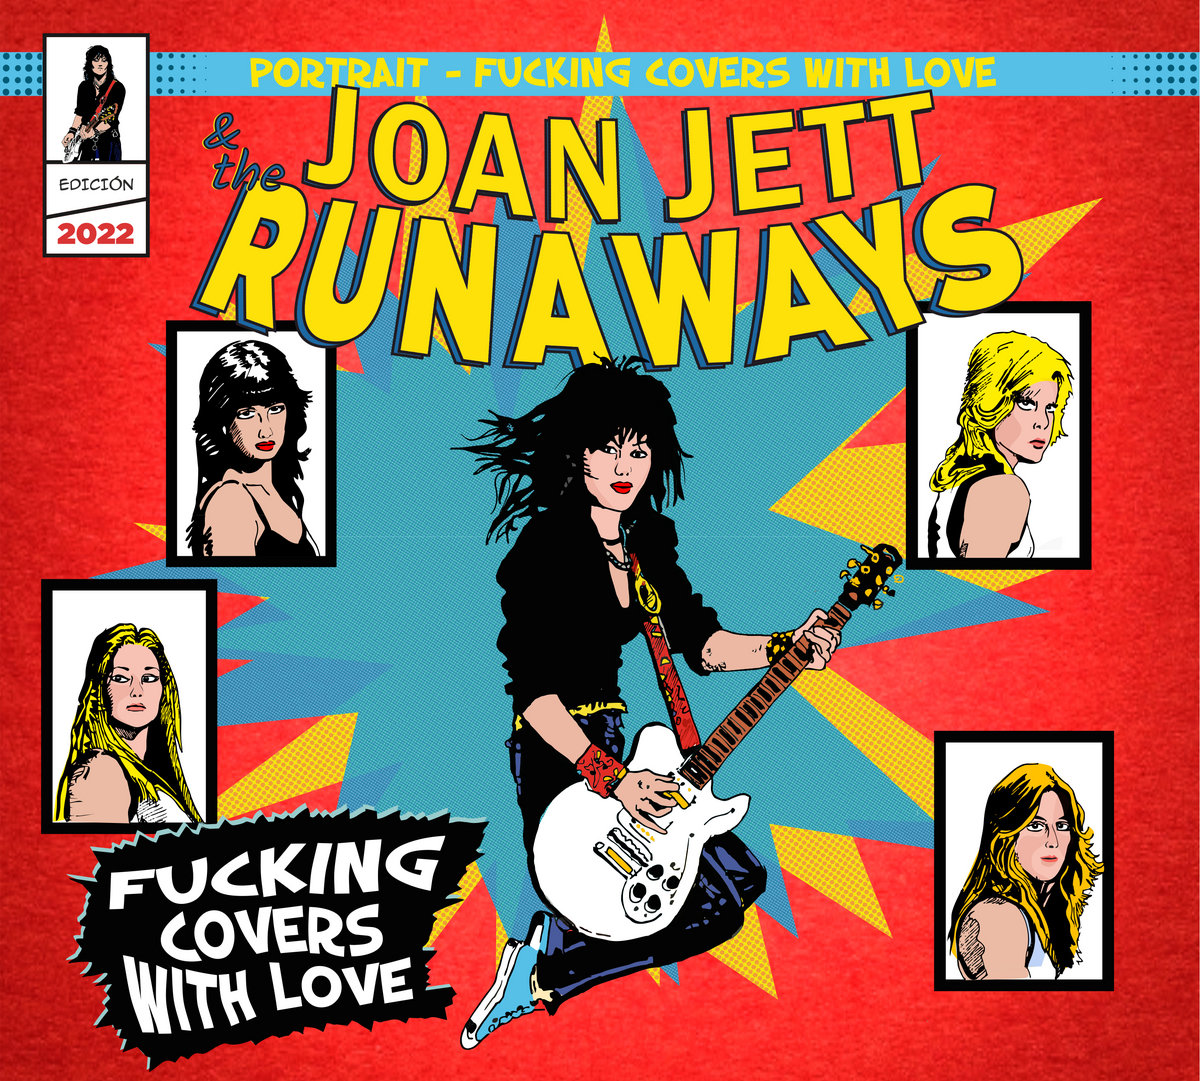 Joan Jett And The Runaways Portrait Fucking Covers With Love Various Artists Runaway Records